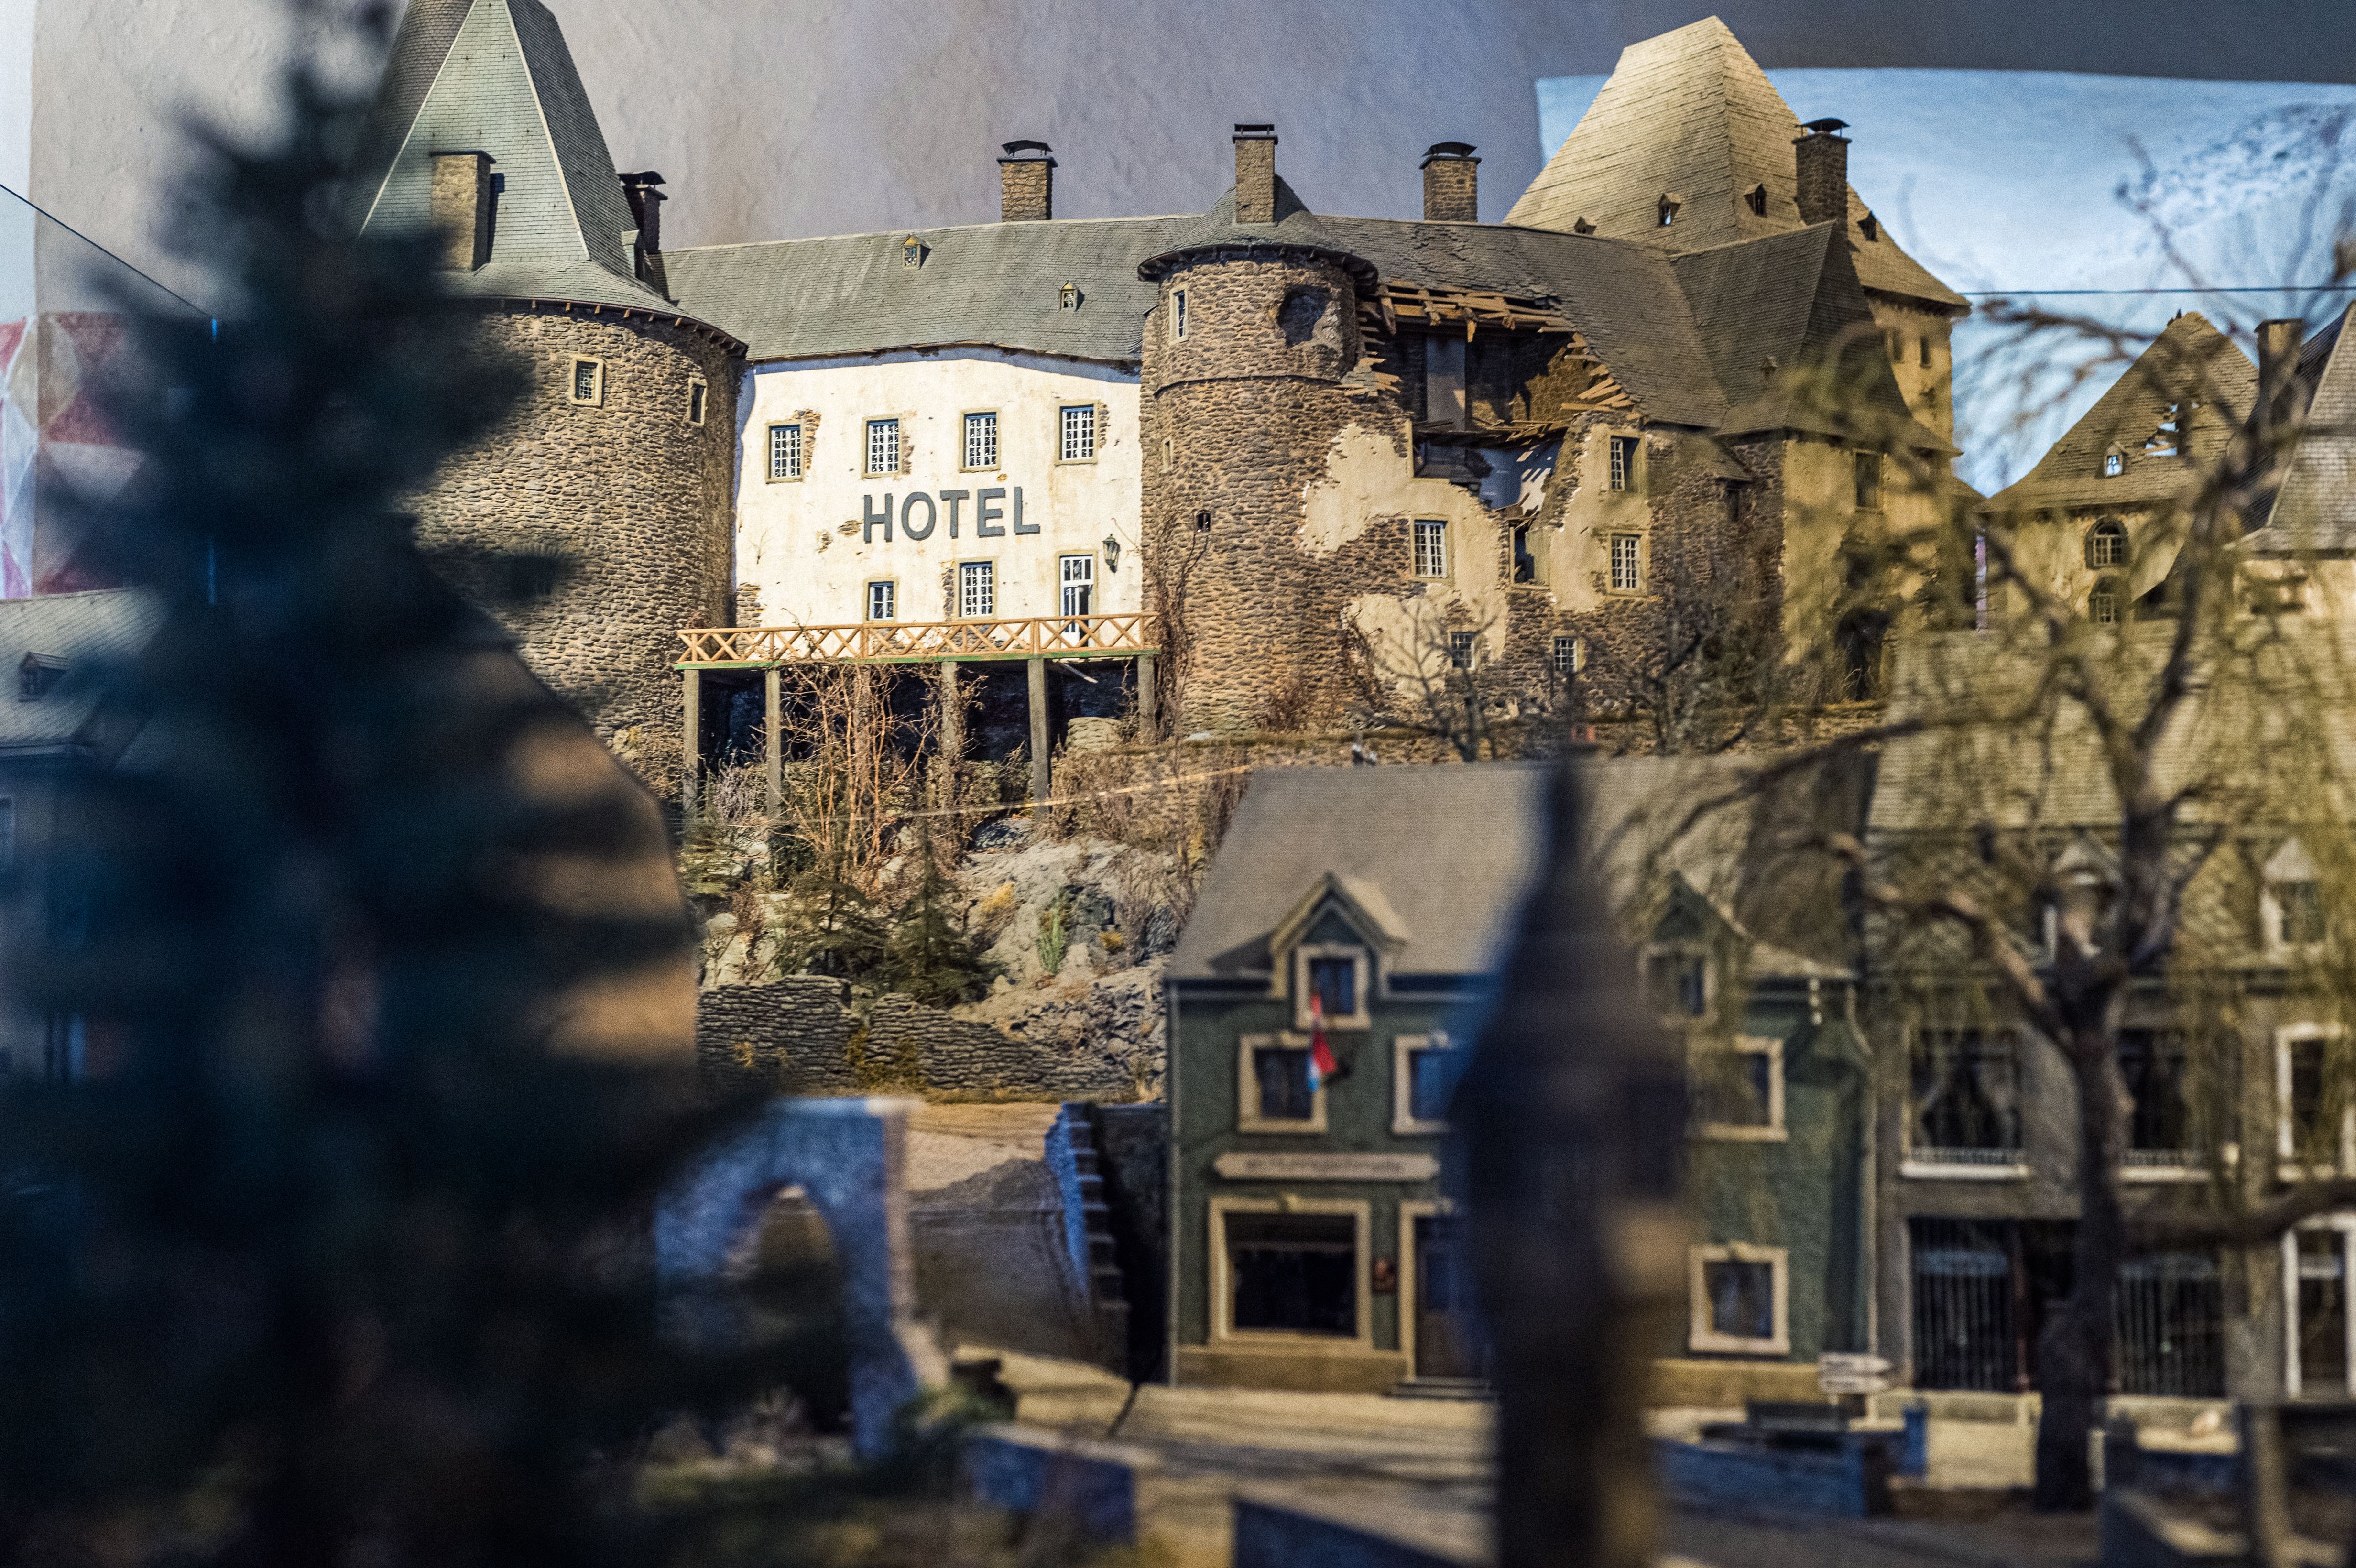 Luxembourg's ancient castles in miniature